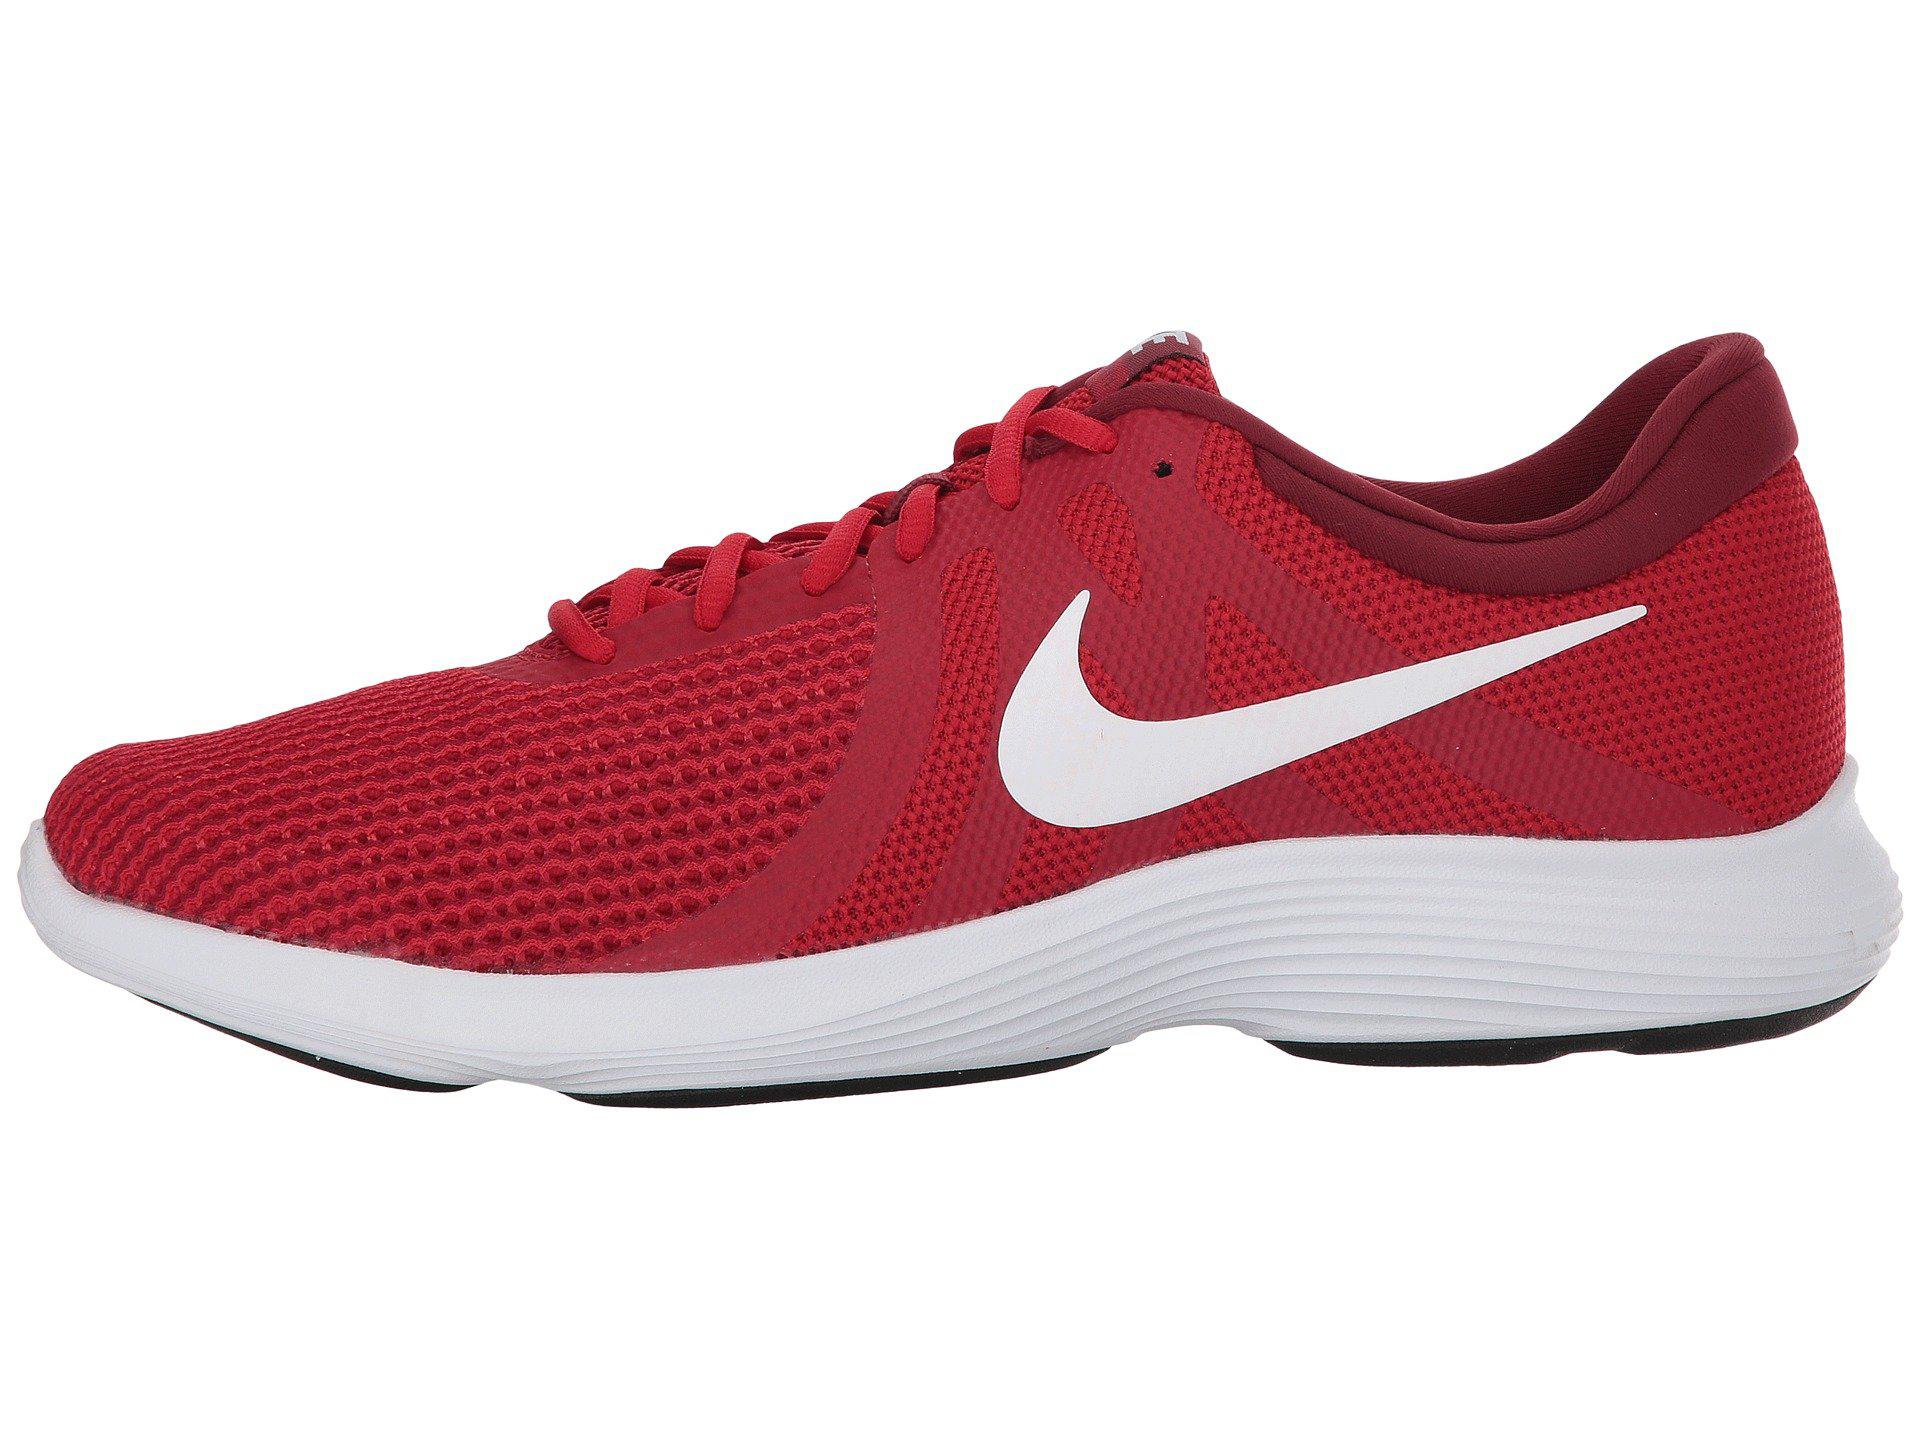 Lyst - Nike Revolution 4 Eu Competition Running Shoes in Red for Men